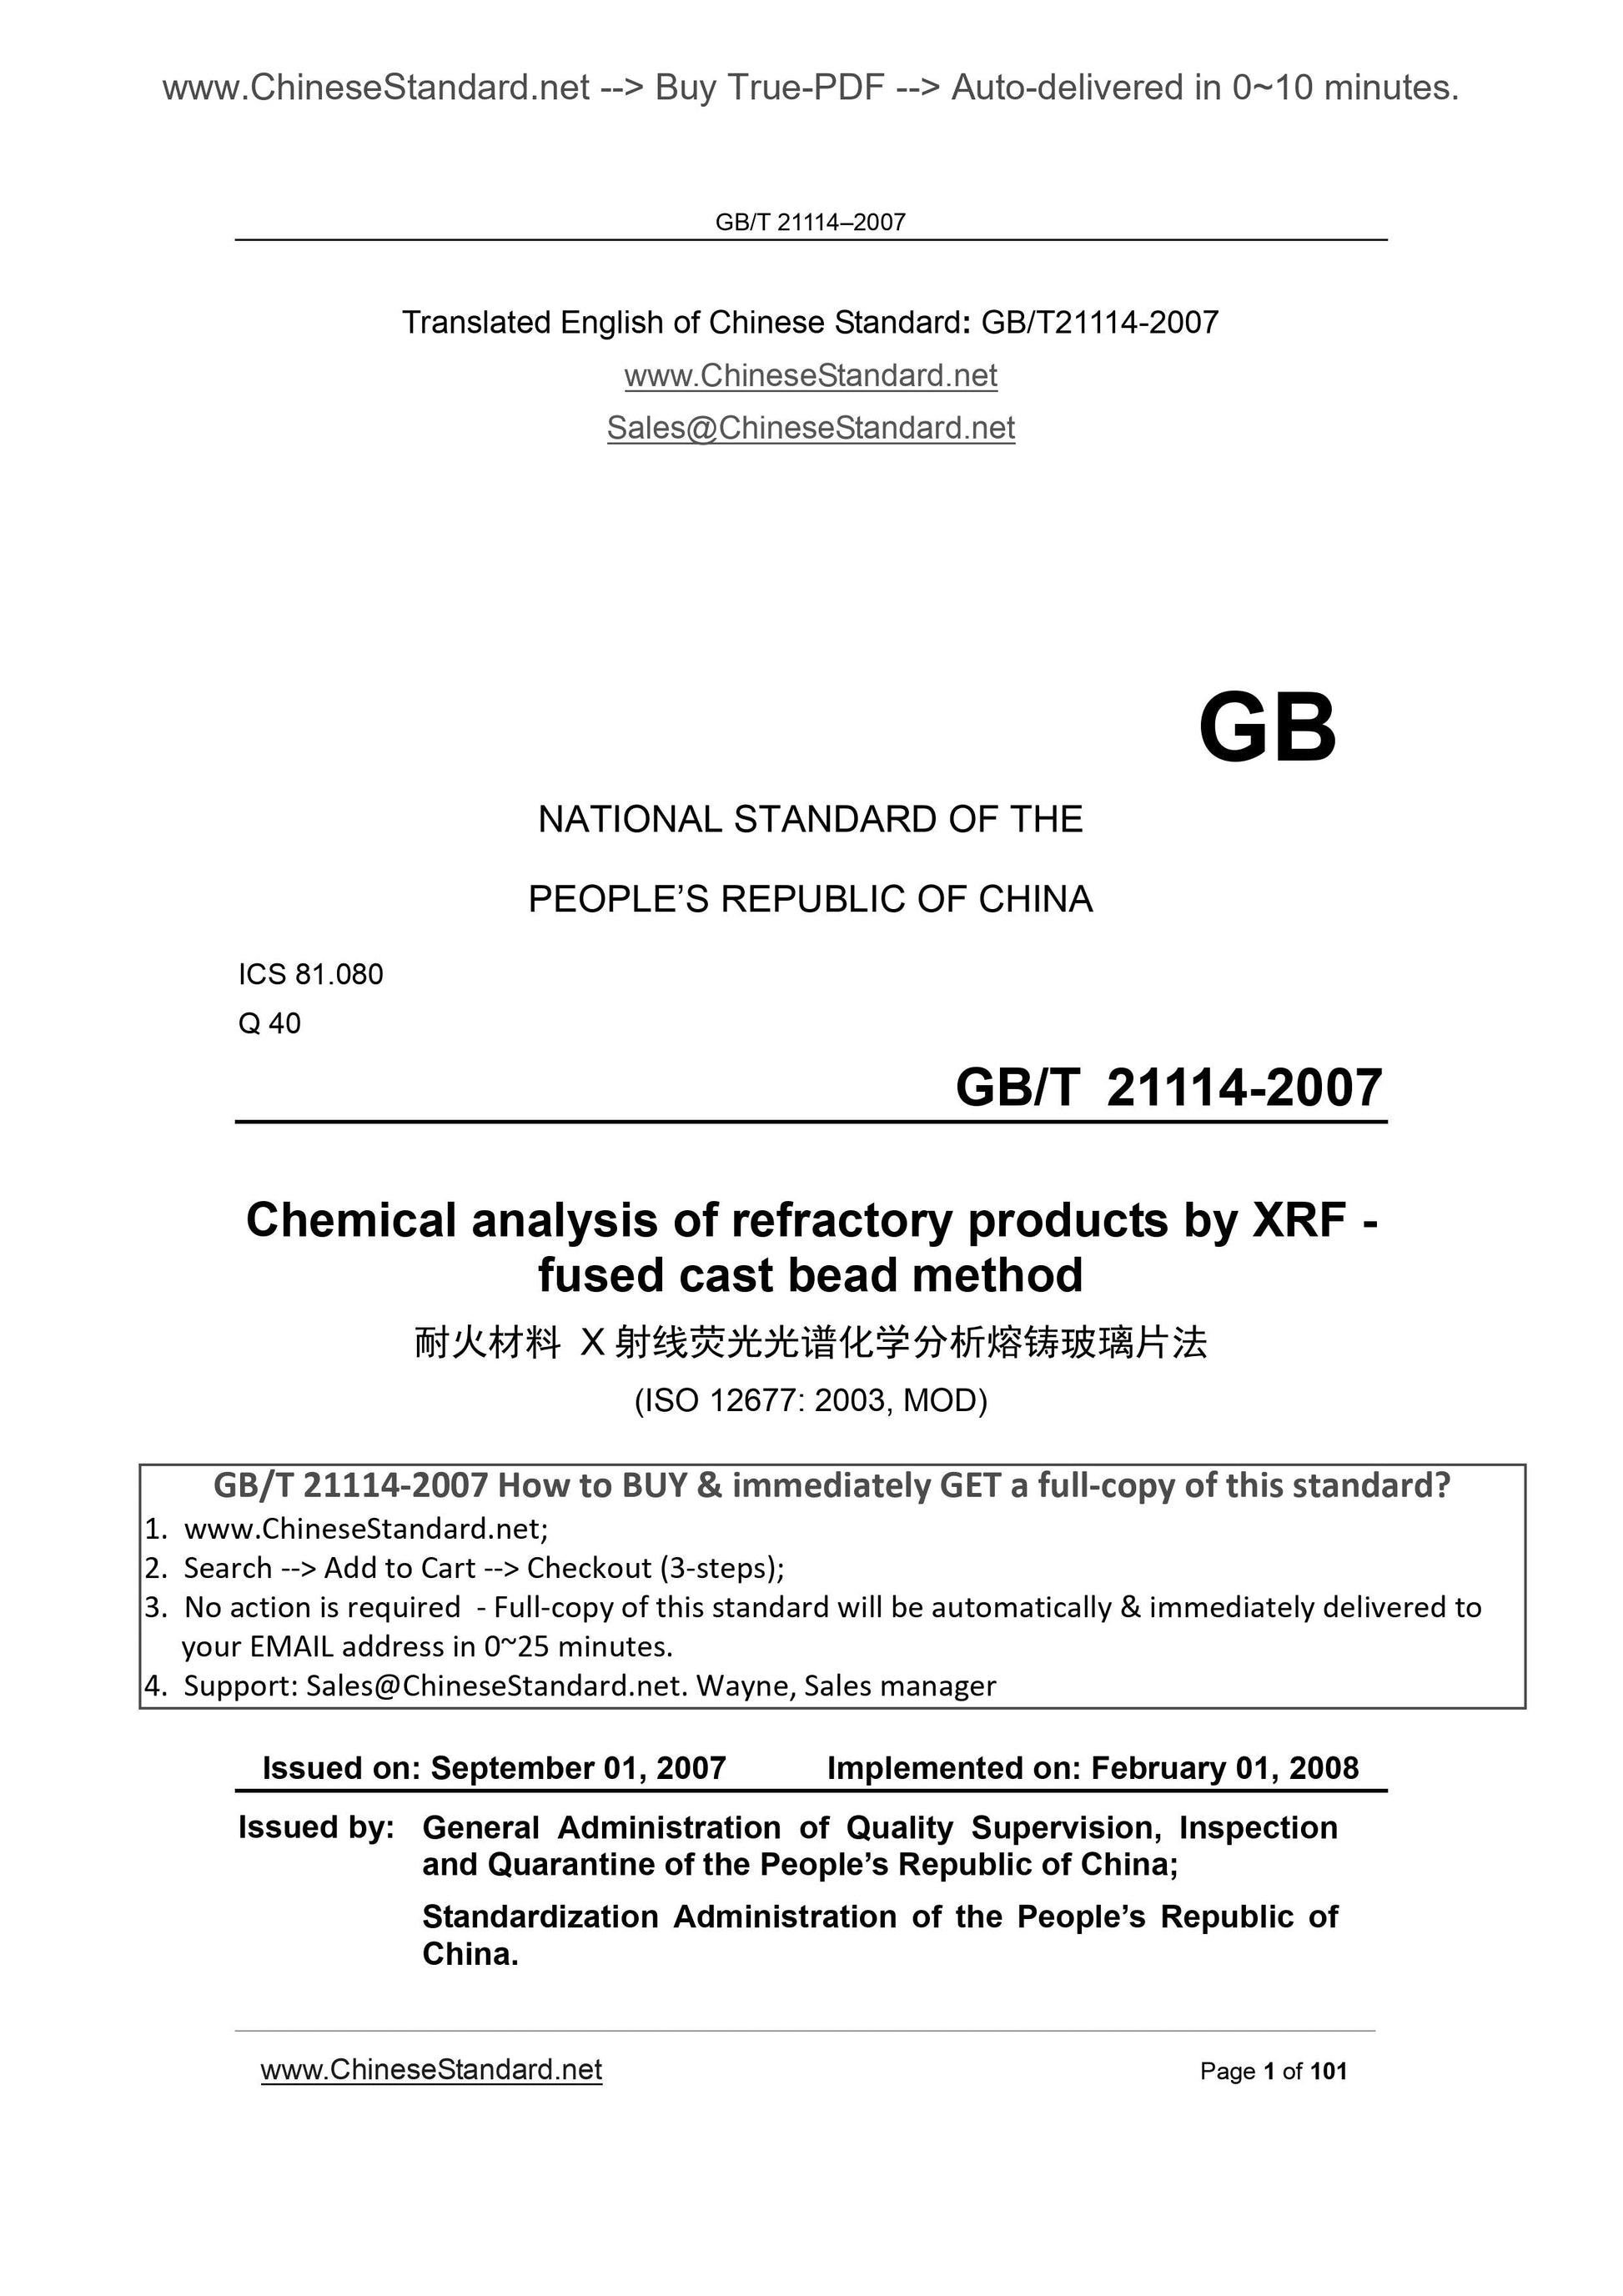 GB/T 21114-2007 Page 1